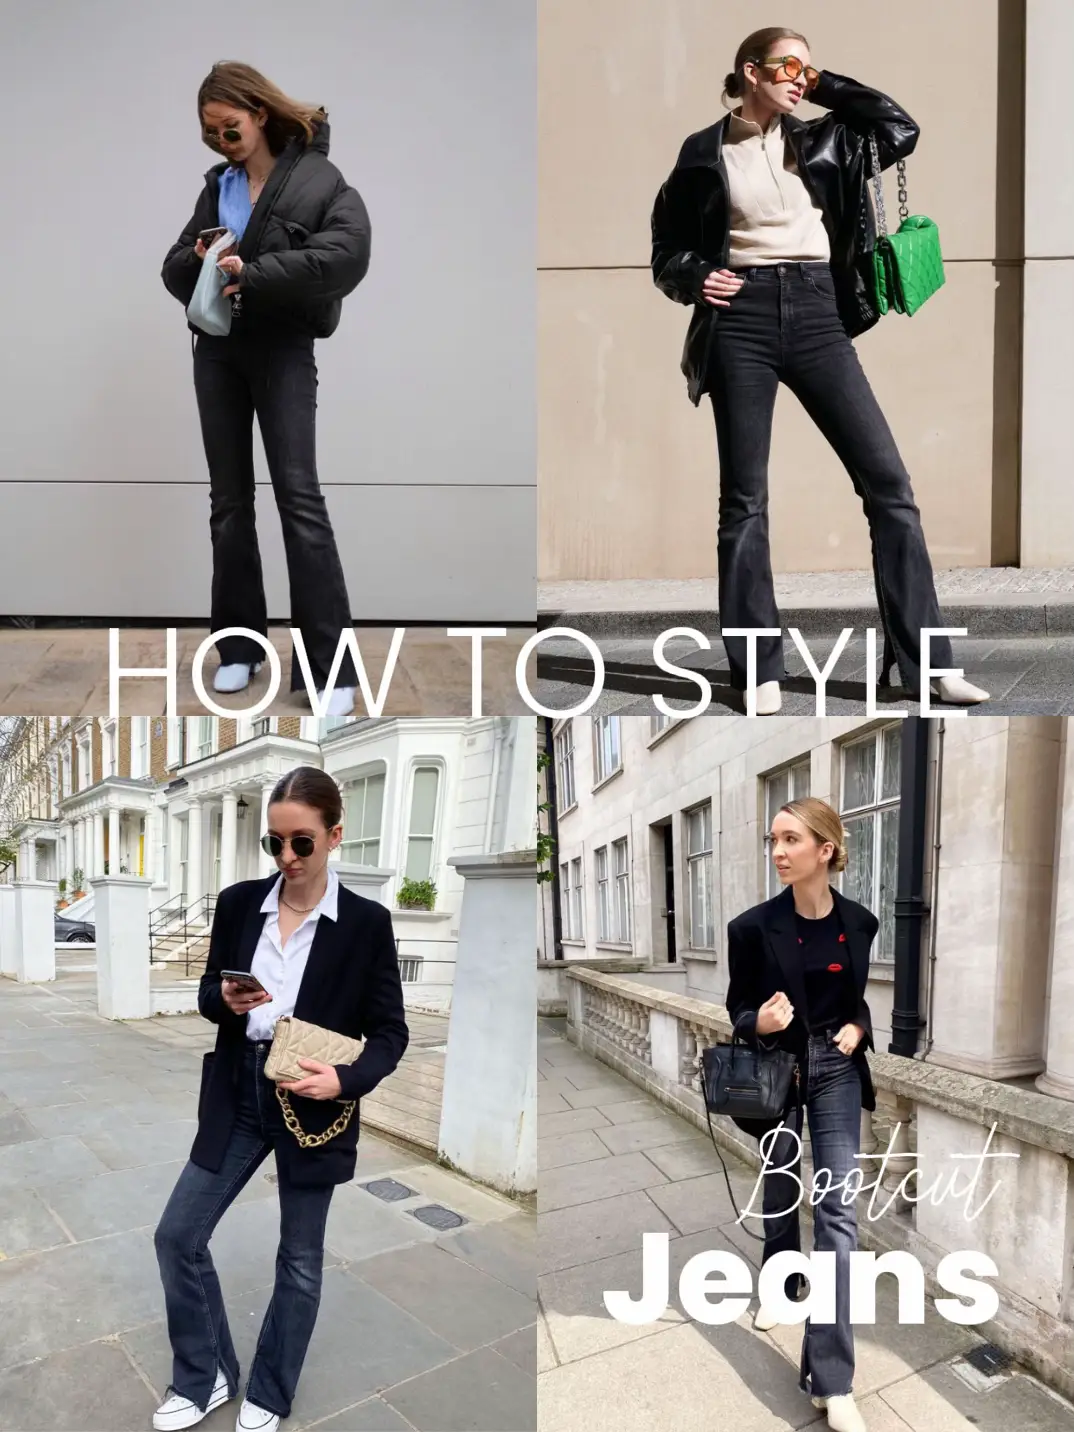 How to Style Bootcut Jeans  7 Outfit Ideas with Bootcut Jeans 